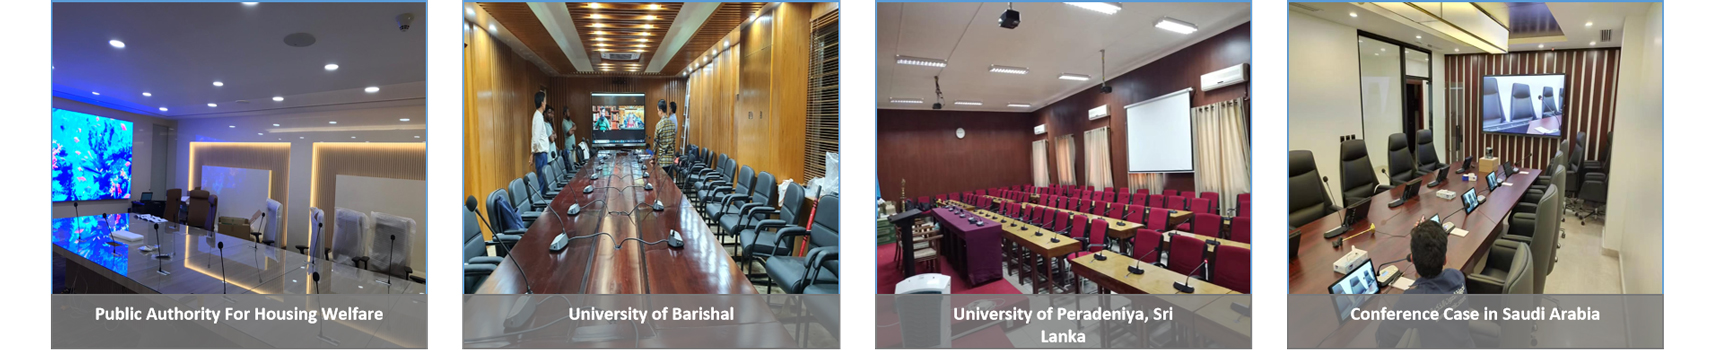 cost-effective-conference-system-for-small-conference-rooms-14.jpg